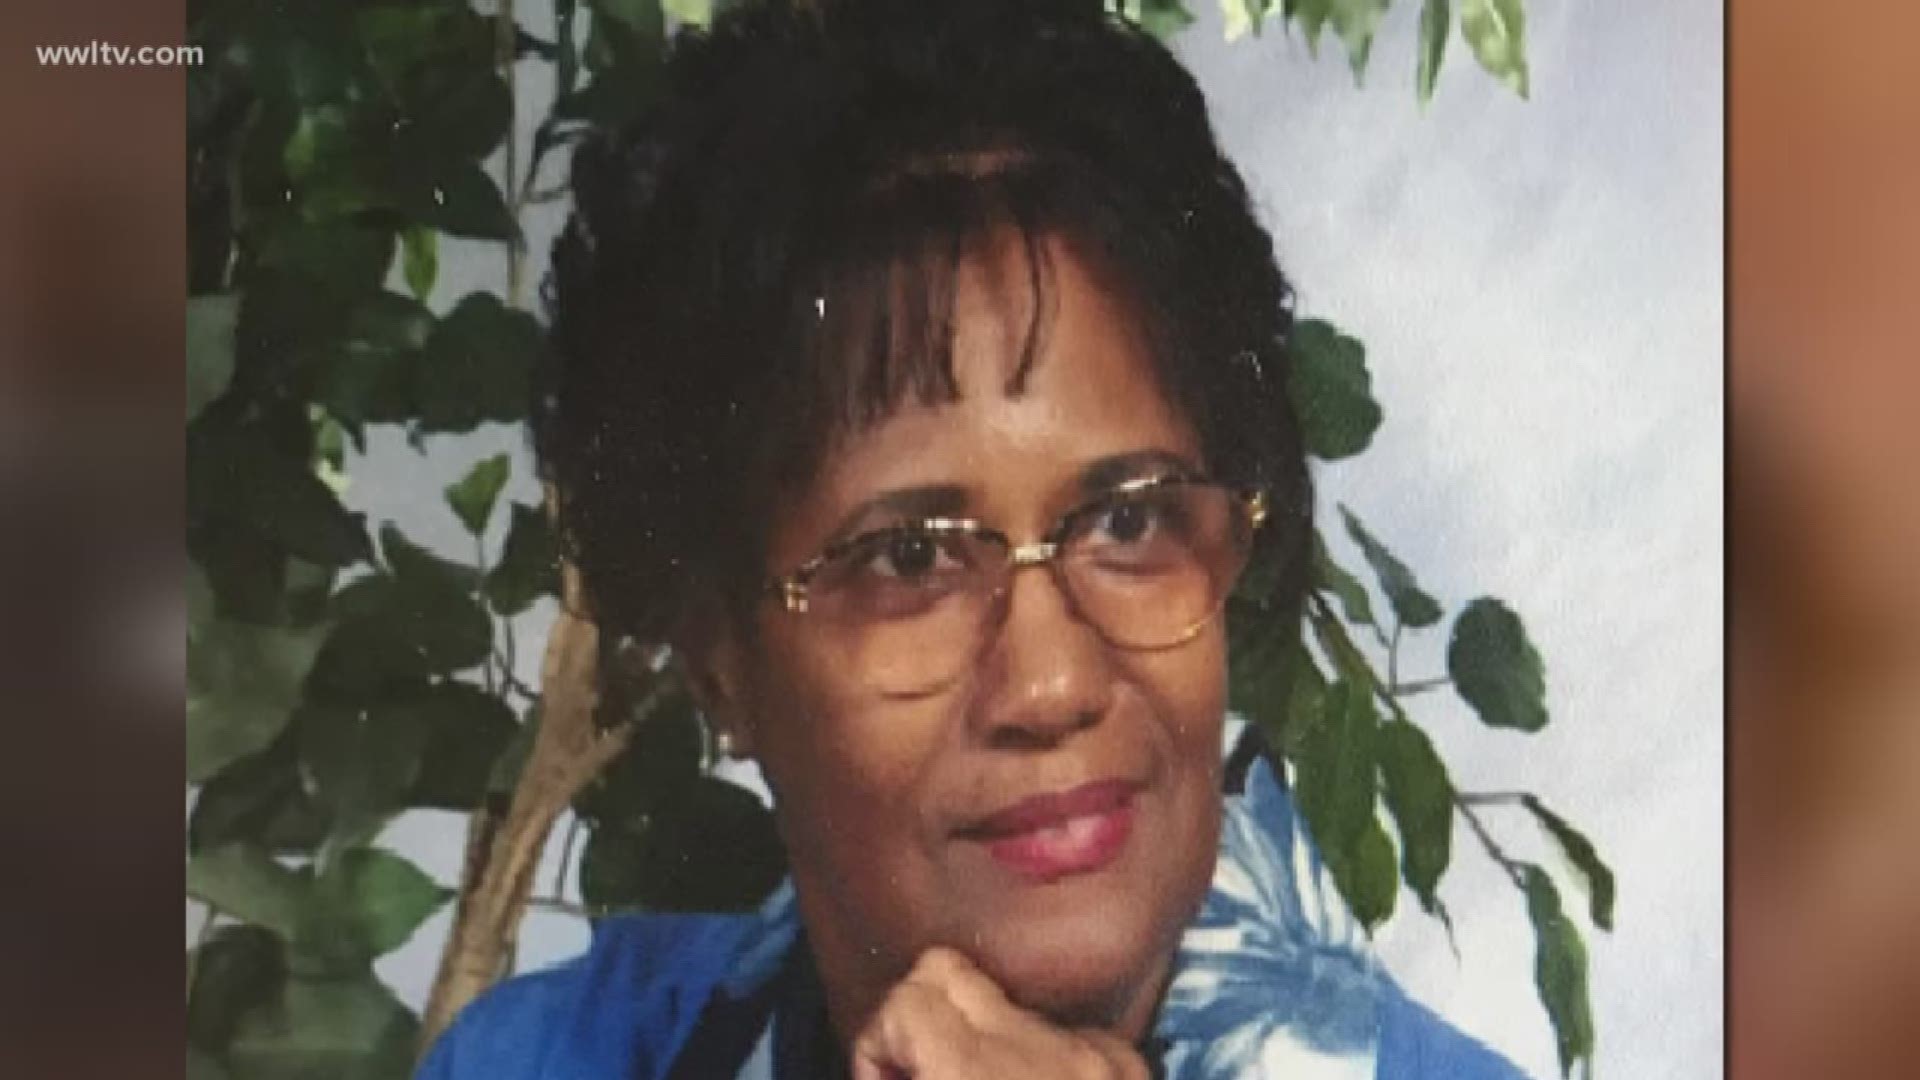 The disappearance of 76-year-old Jean Stokes on Oct. 11 has her family desperate for answers. 